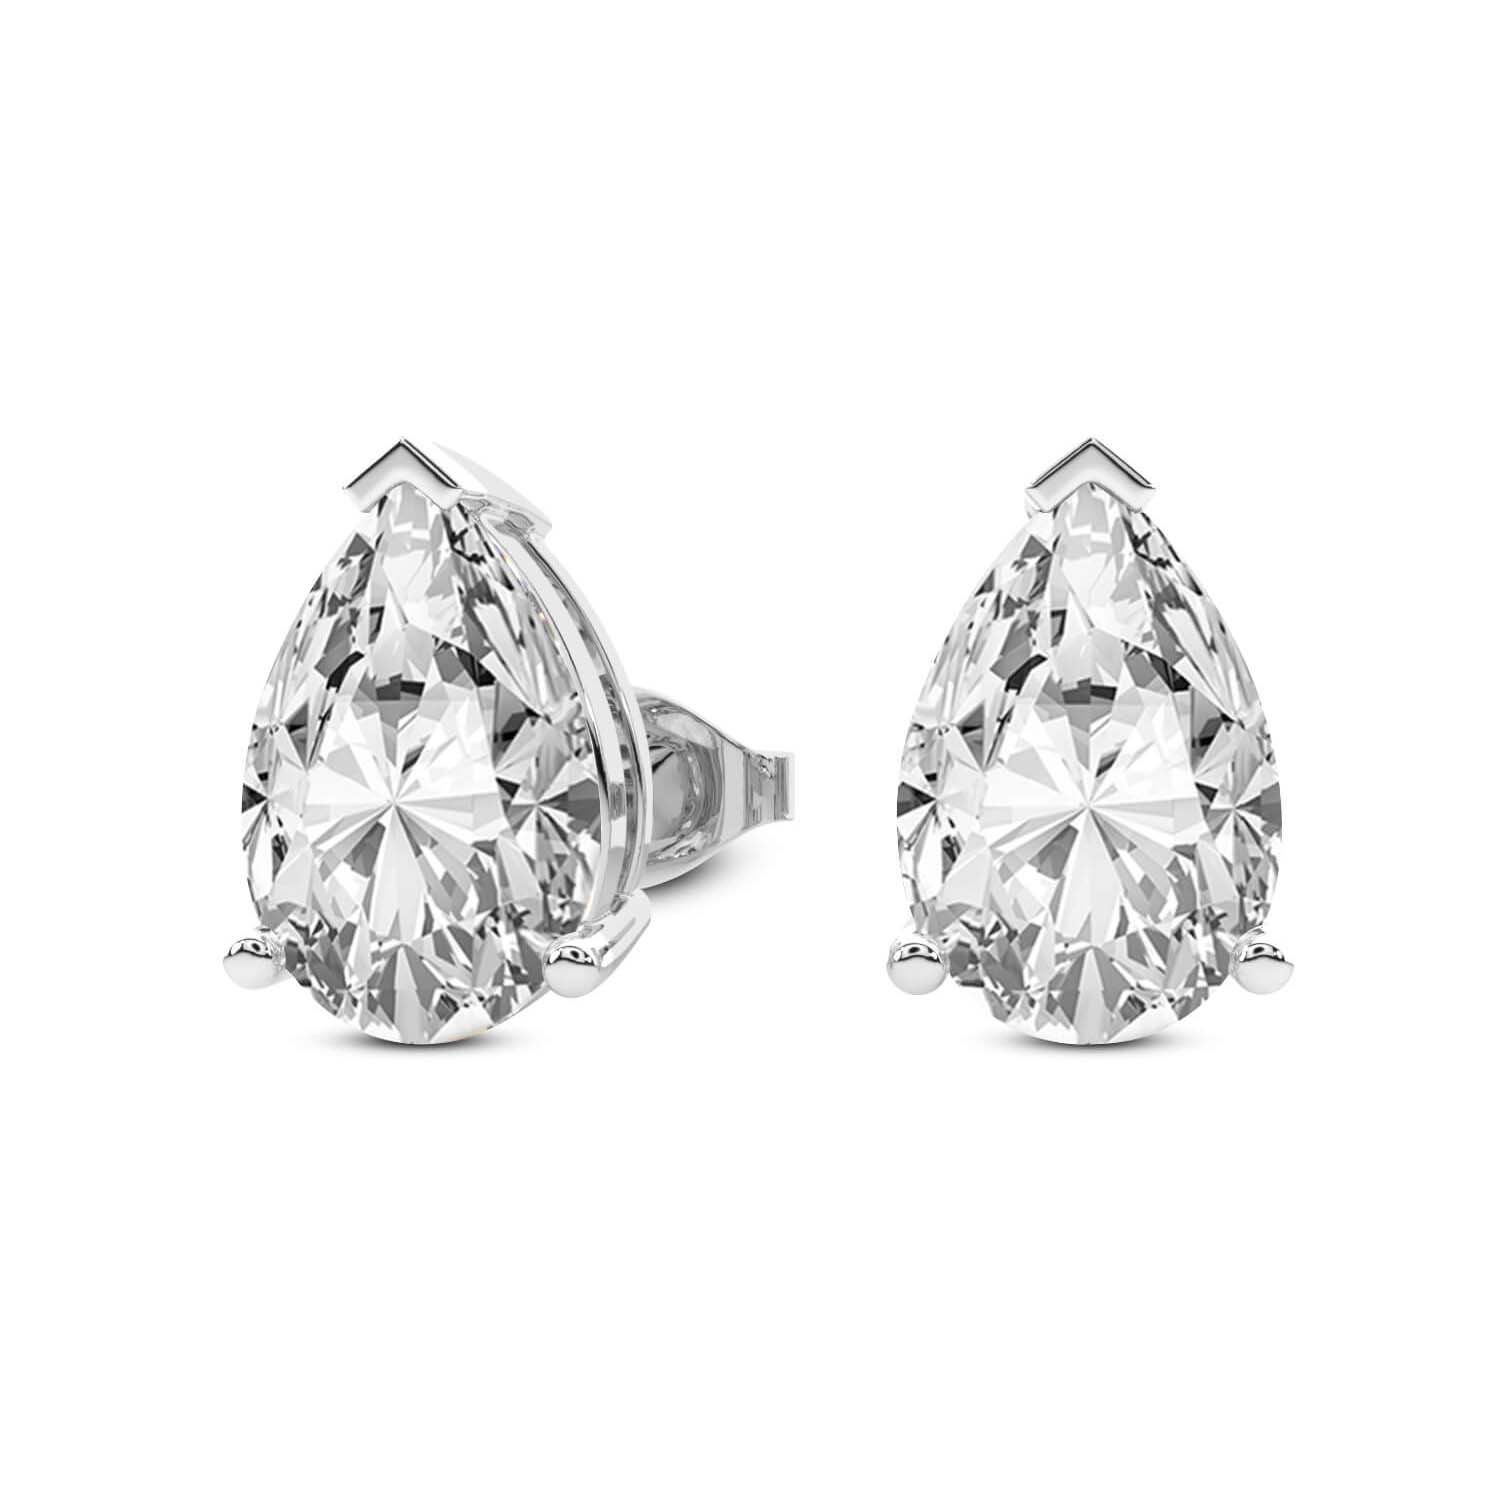 3 Prong Pear Lab Diamond Stud Earrings white gold earring, small right view